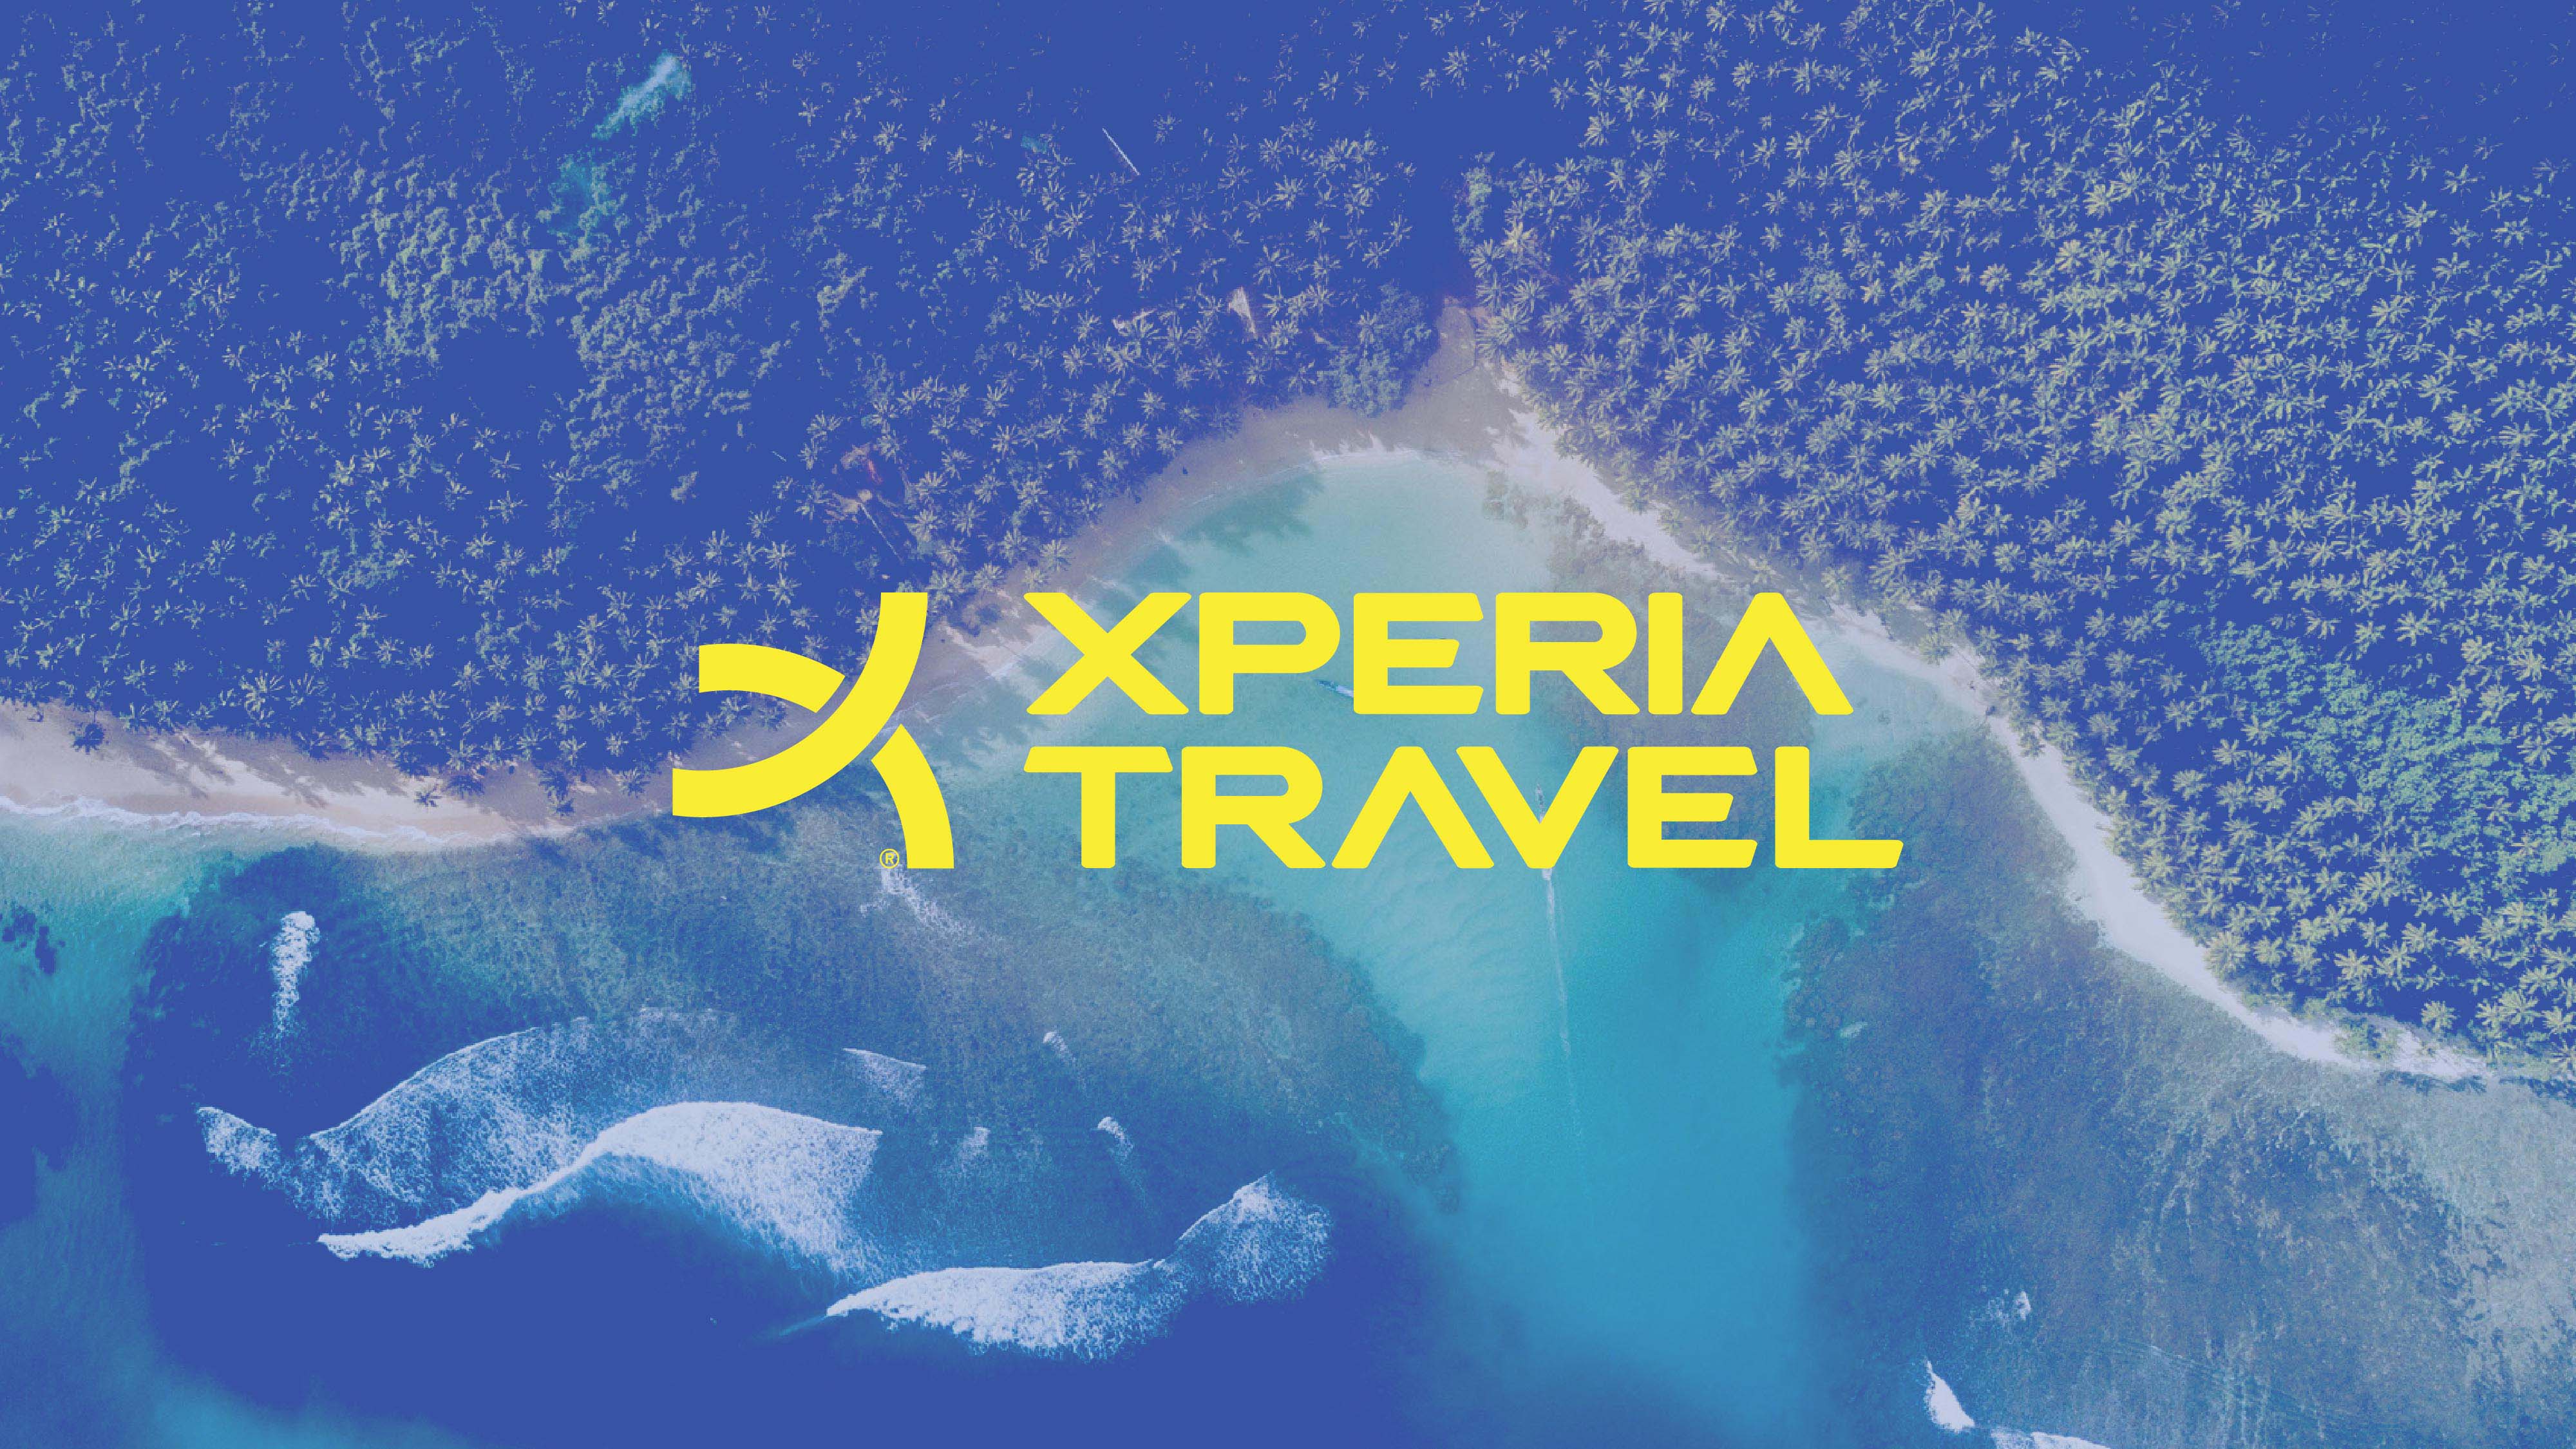 Brand Design for Travel Agency Xperia Travel